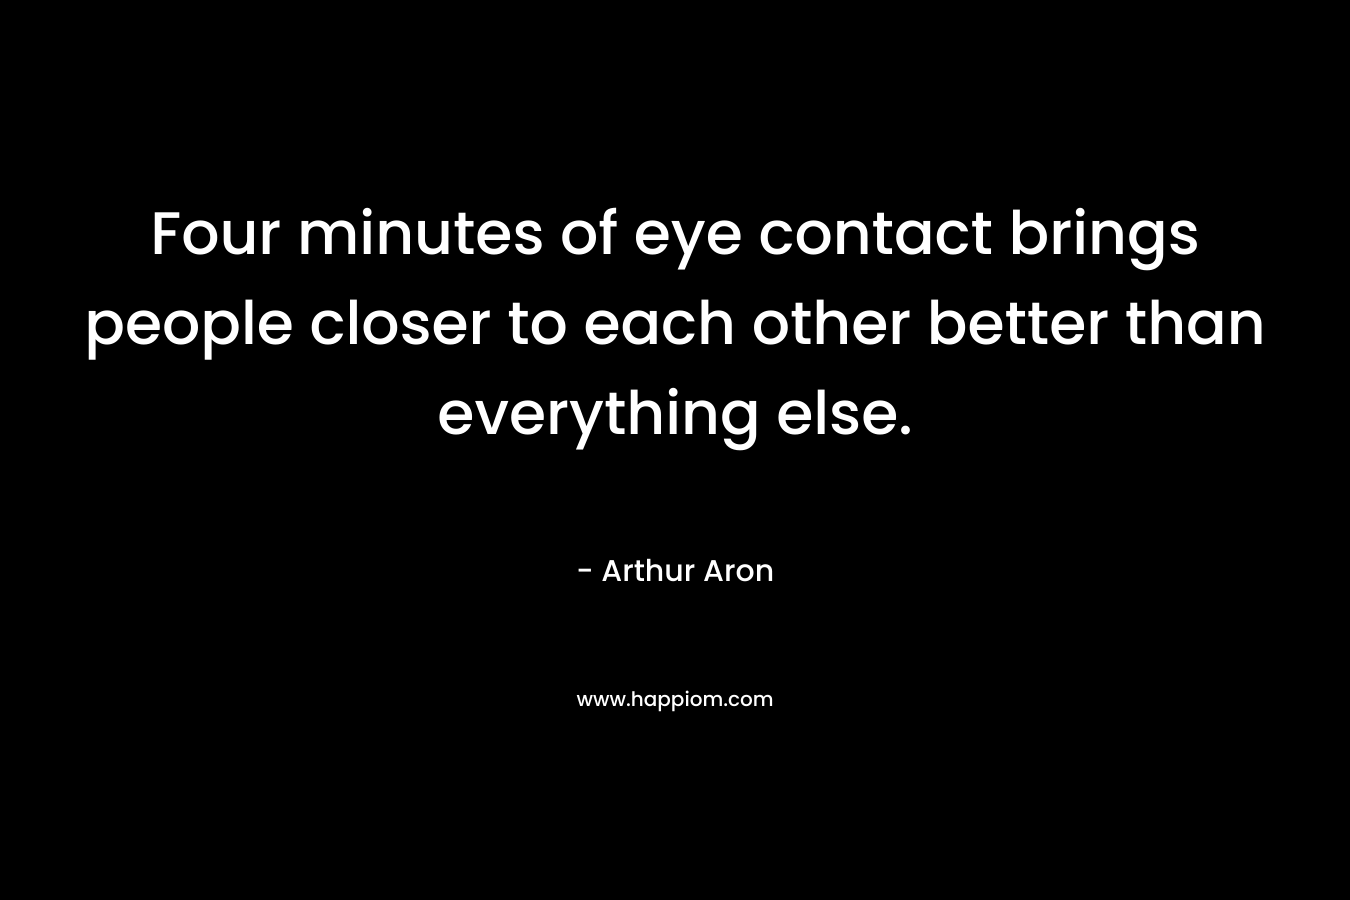 Four minutes of eye contact brings people closer to each other better than everything else.